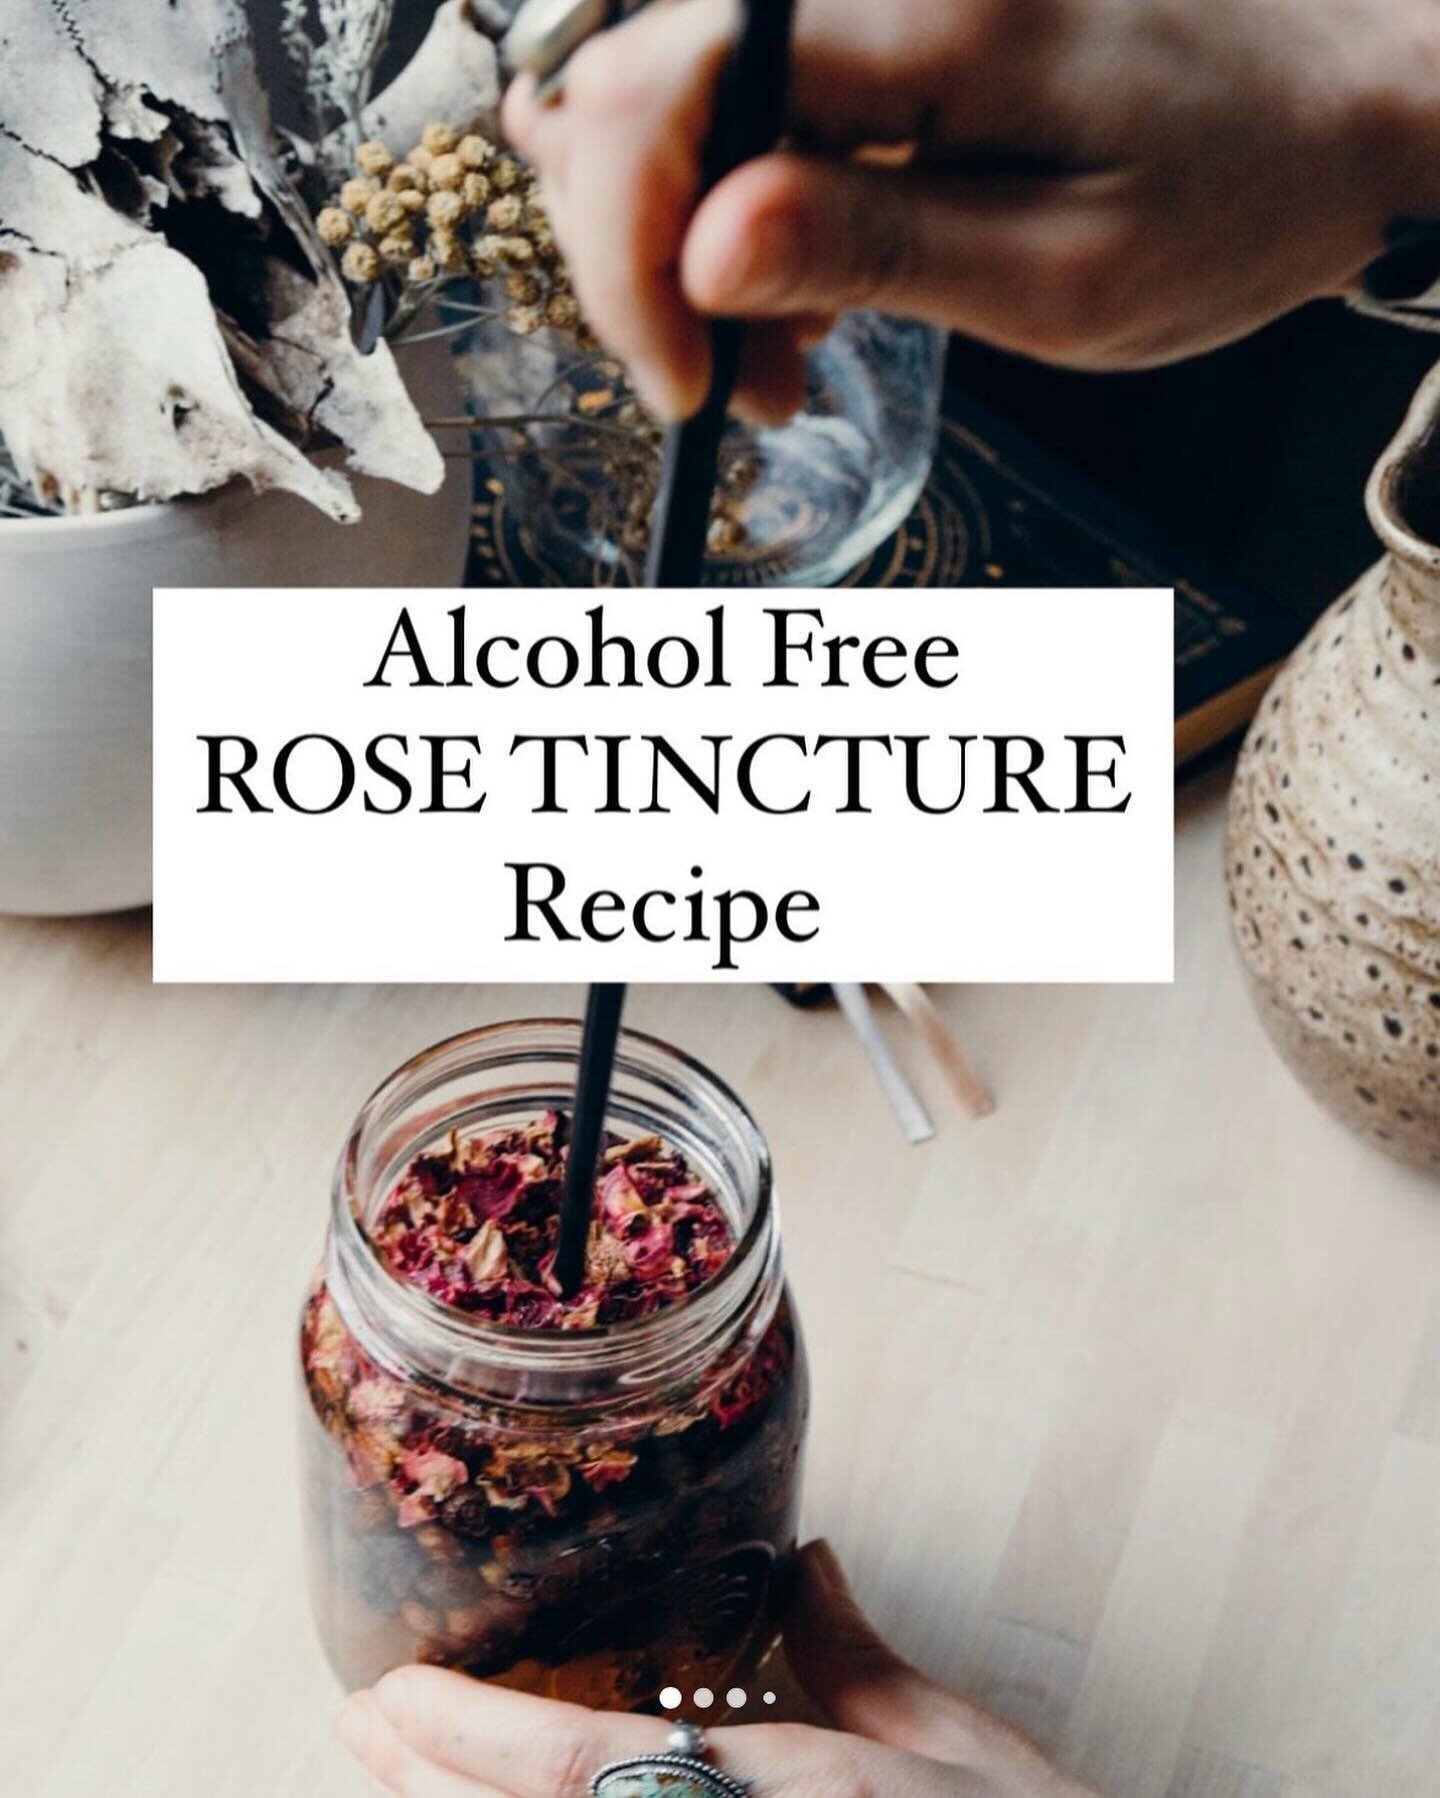 I LOVE making herbal recipes using Apple Cider Vinegar. ACV has SO many benefits on its own &amp; I prefer an alcohol free tincture. 

Rose is perfect ally for our hearts and is a beautiful teacher for navigating the journey of balancing softness (be